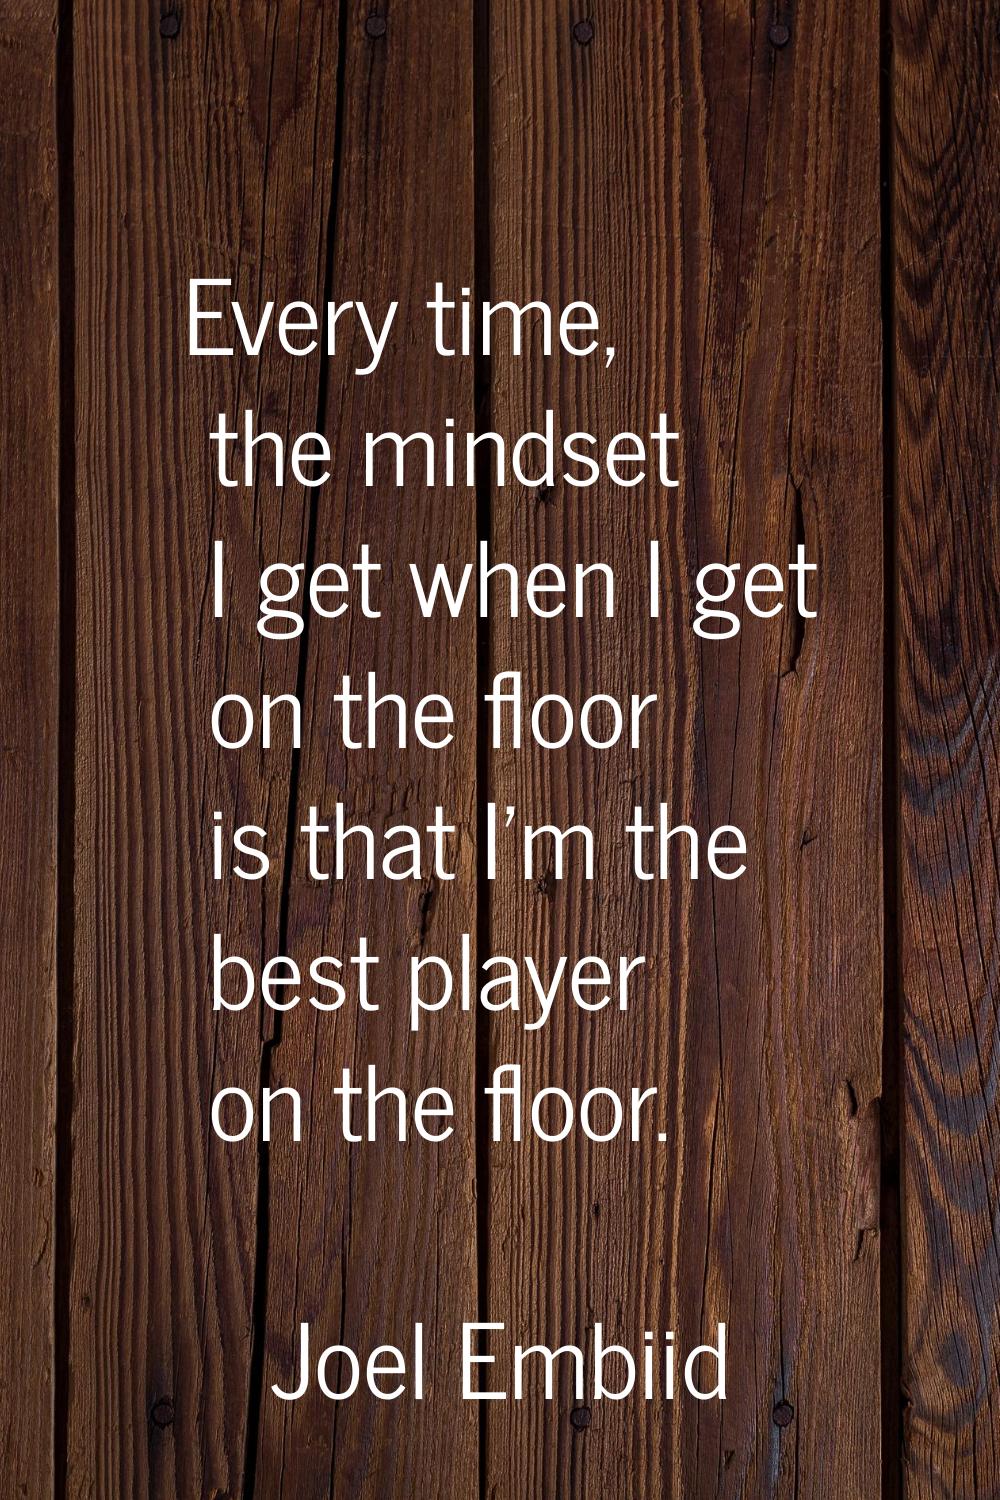 Every time, the mindset I get when I get on the floor is that I'm the best player on the floor.